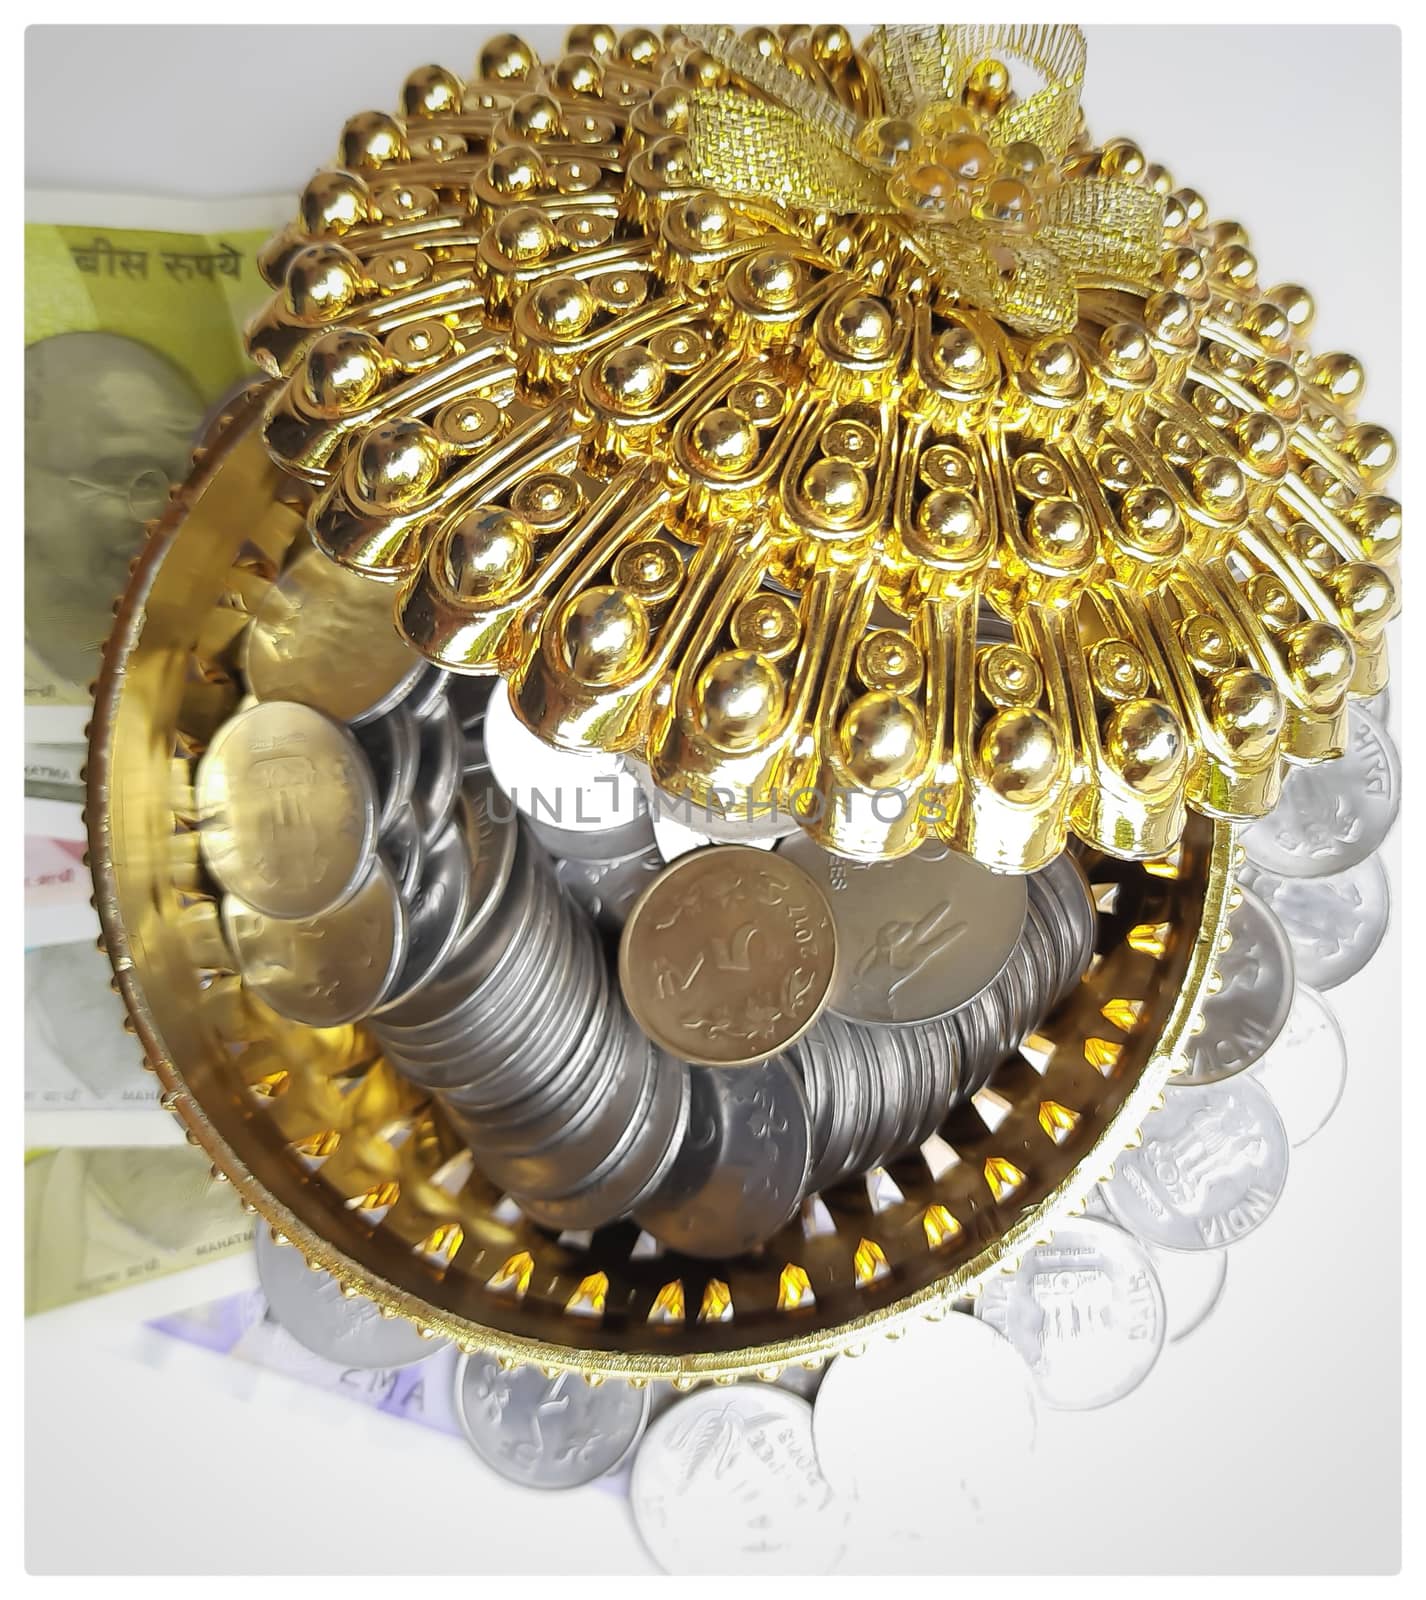 Indian new currency spread randomly with coins in golden color gift box beautifully and 500 rupees with rubber band